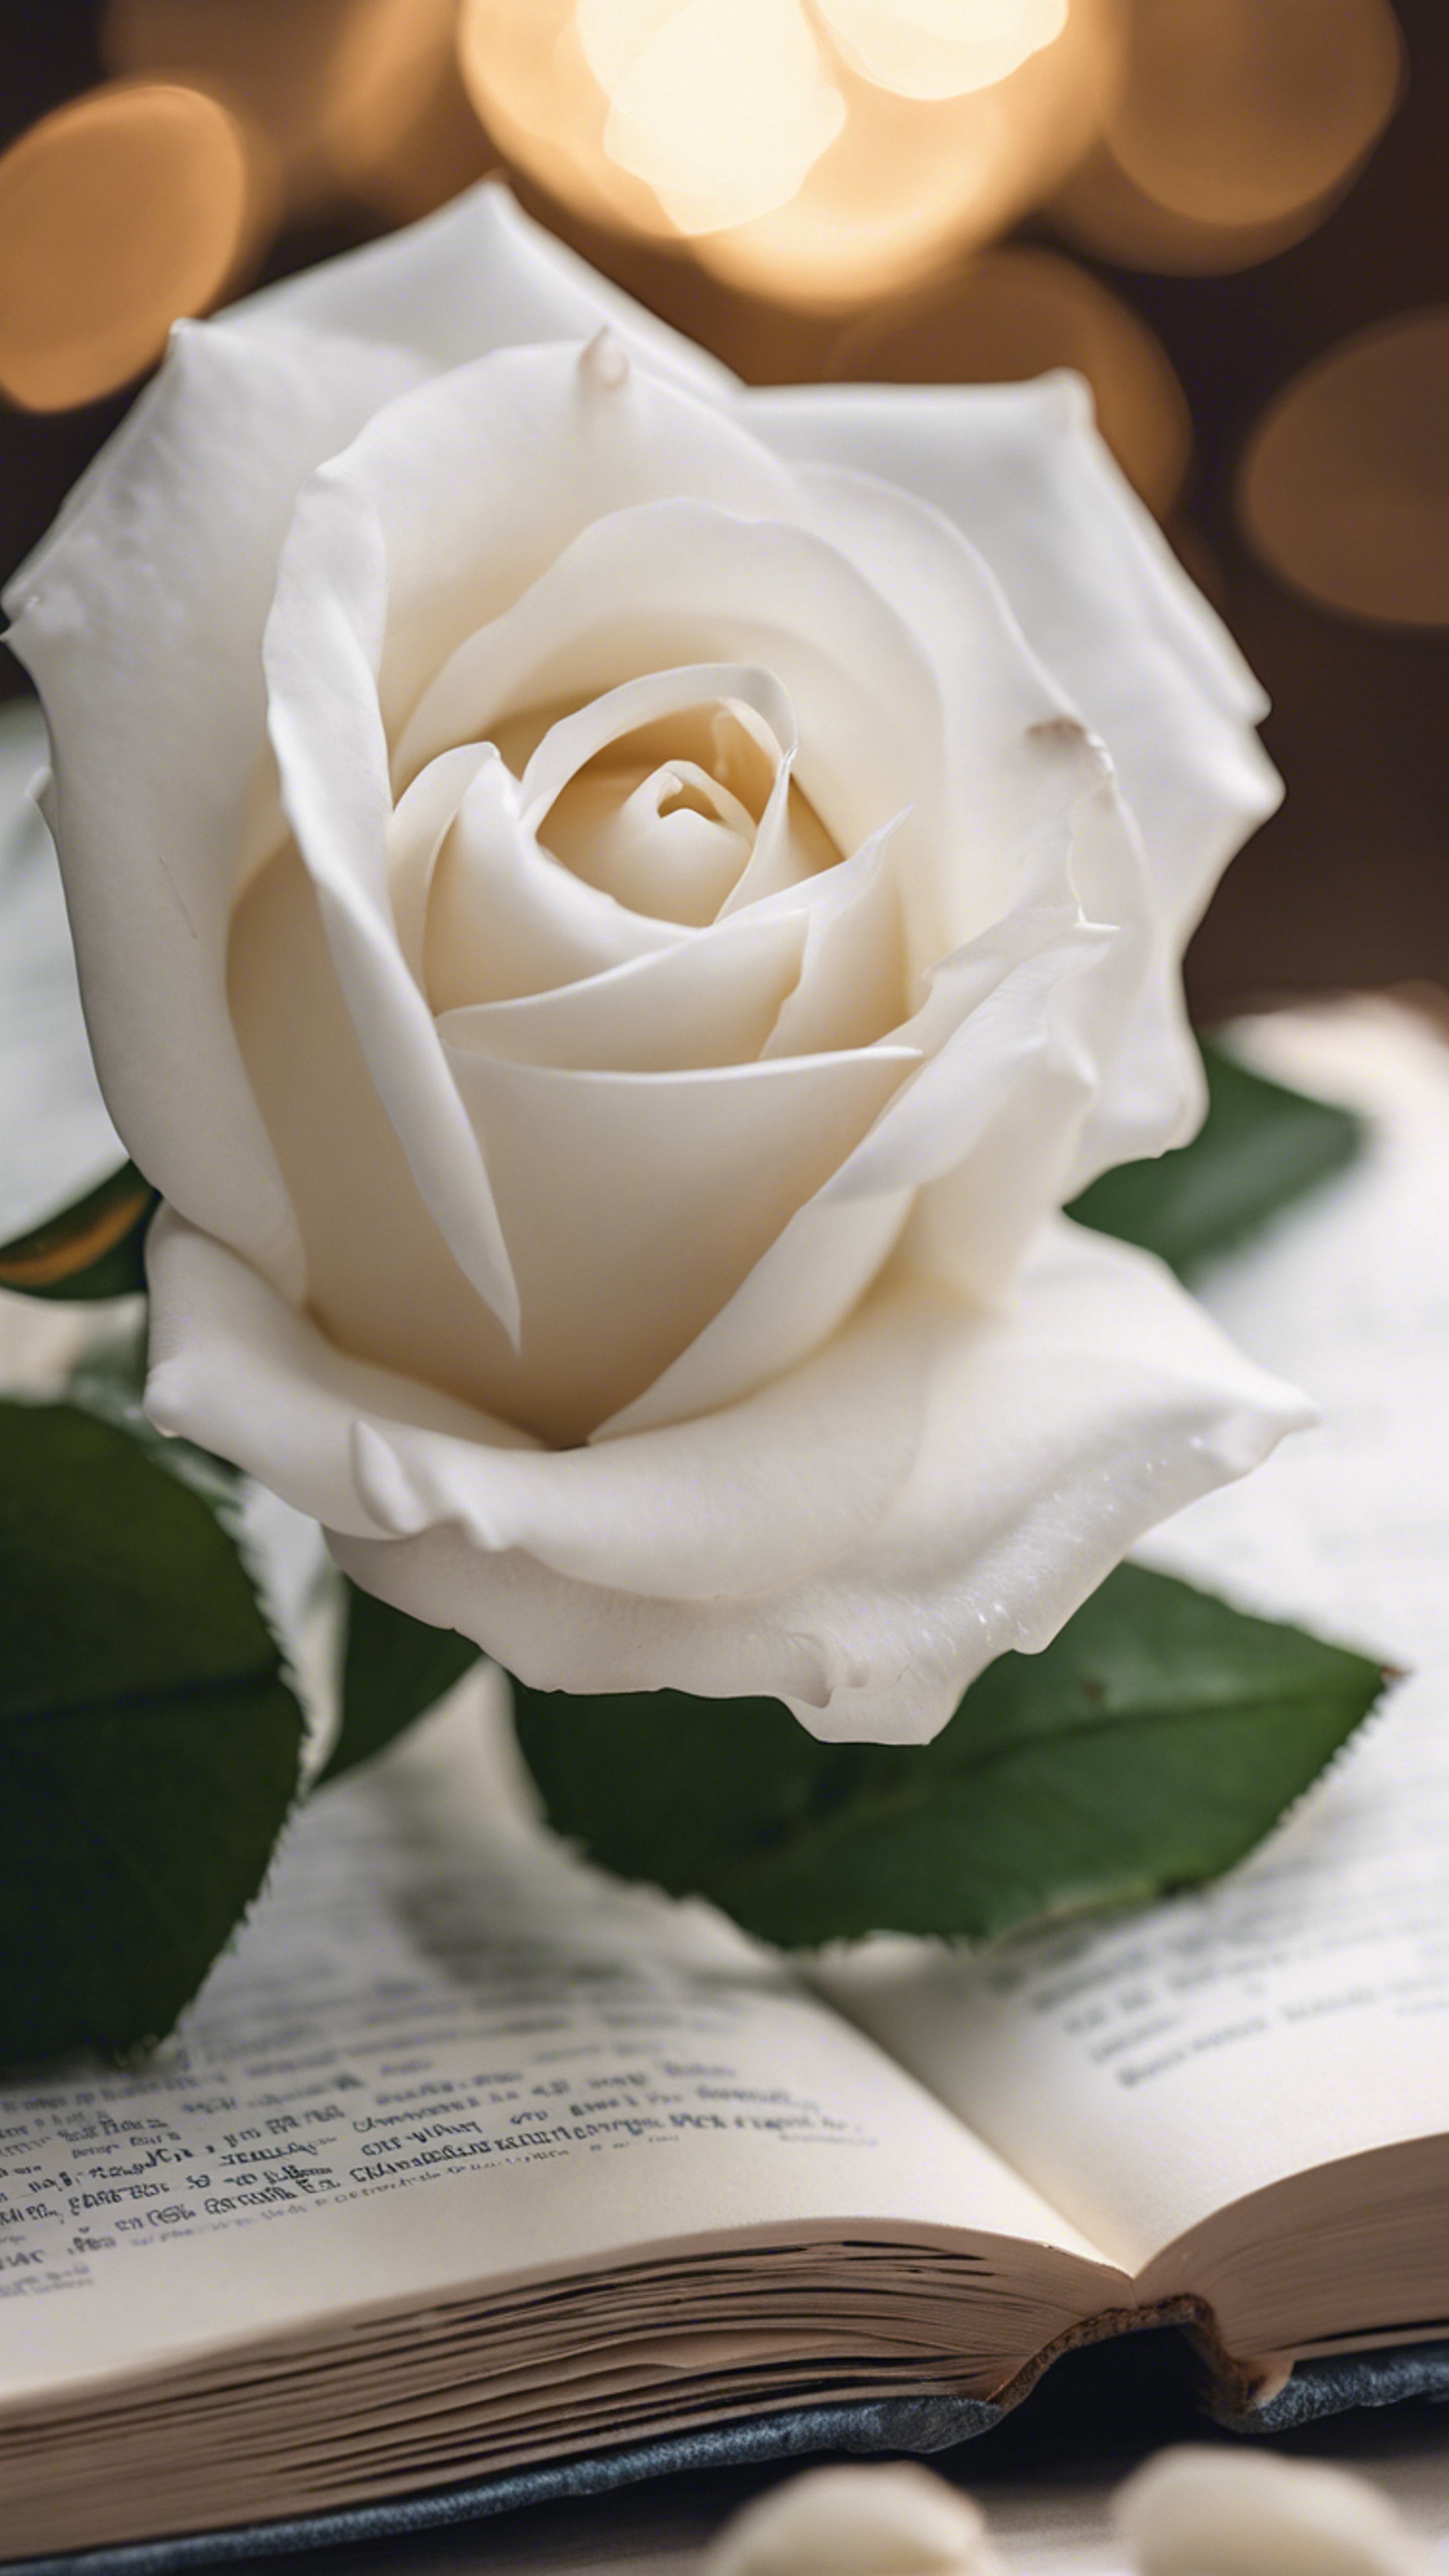 A serene white rose perched on an open hardcover book. Behang[5eeaaa5d95634df1b3fb]